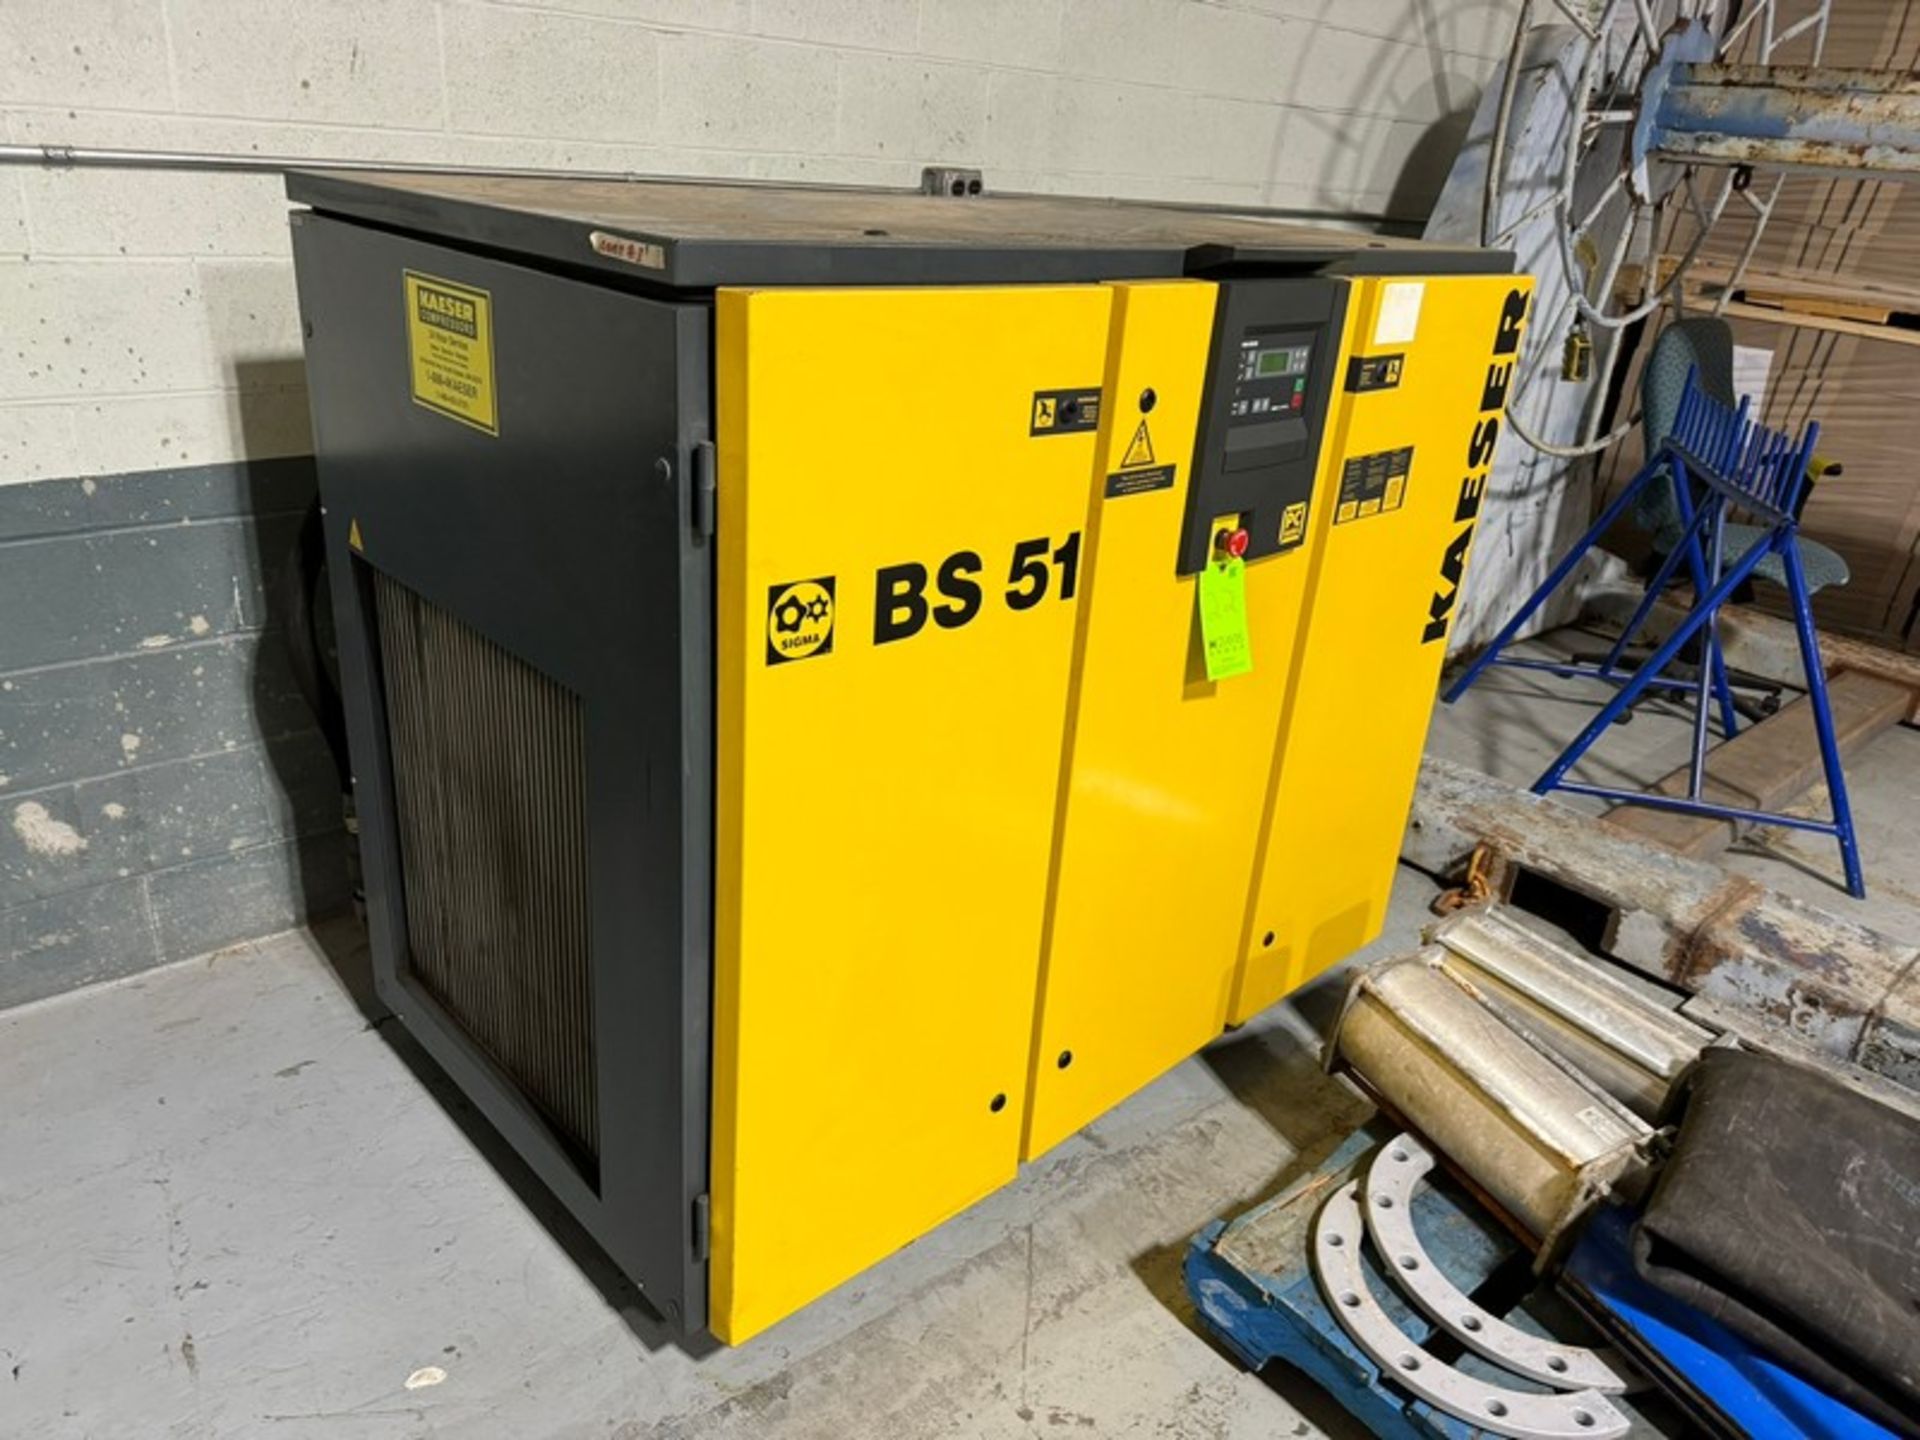 2001 KAESER BS 51 Air Compressor, S/N 1127, 460 Volts, 3 Phase (LOCATED IN GLOUCESTER, MA) - Image 2 of 6